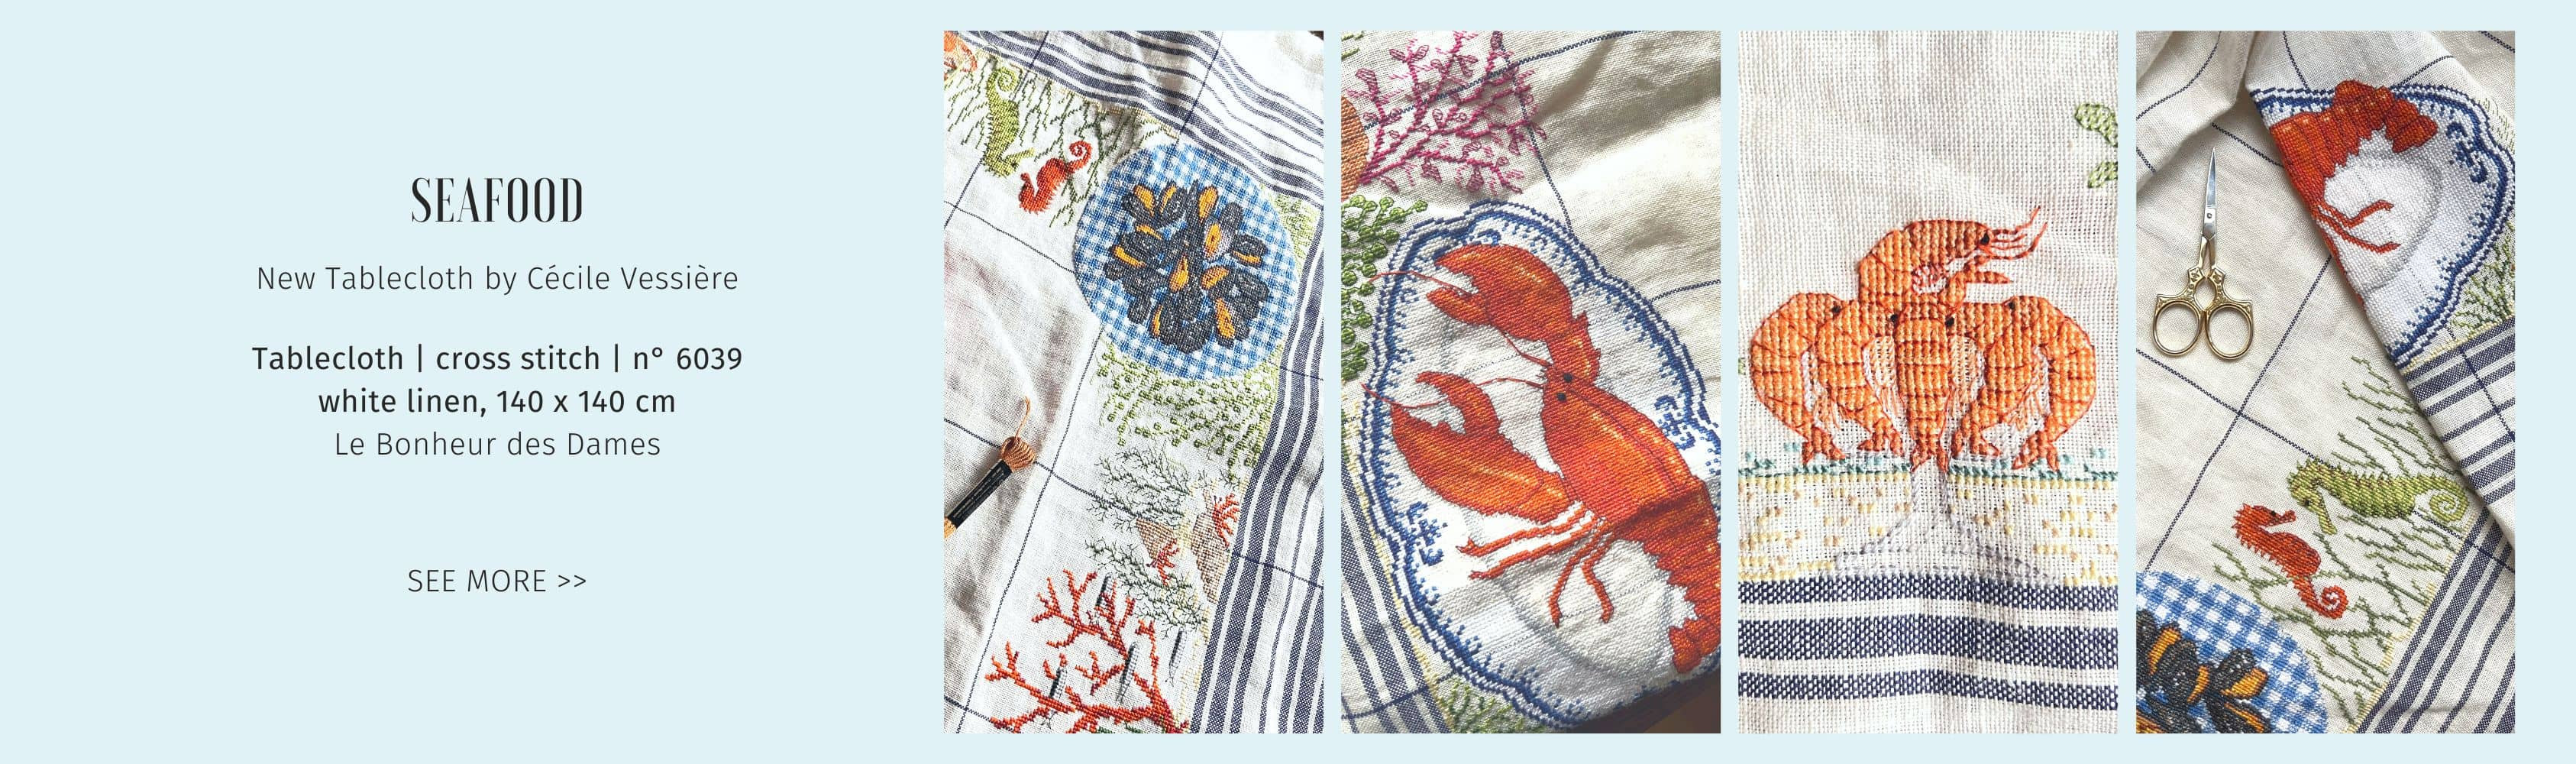 Seafood. New tablecloth to embroider in cross stitch on 14 thr/cm linen. Le Bonheur des Dames ref: 6039